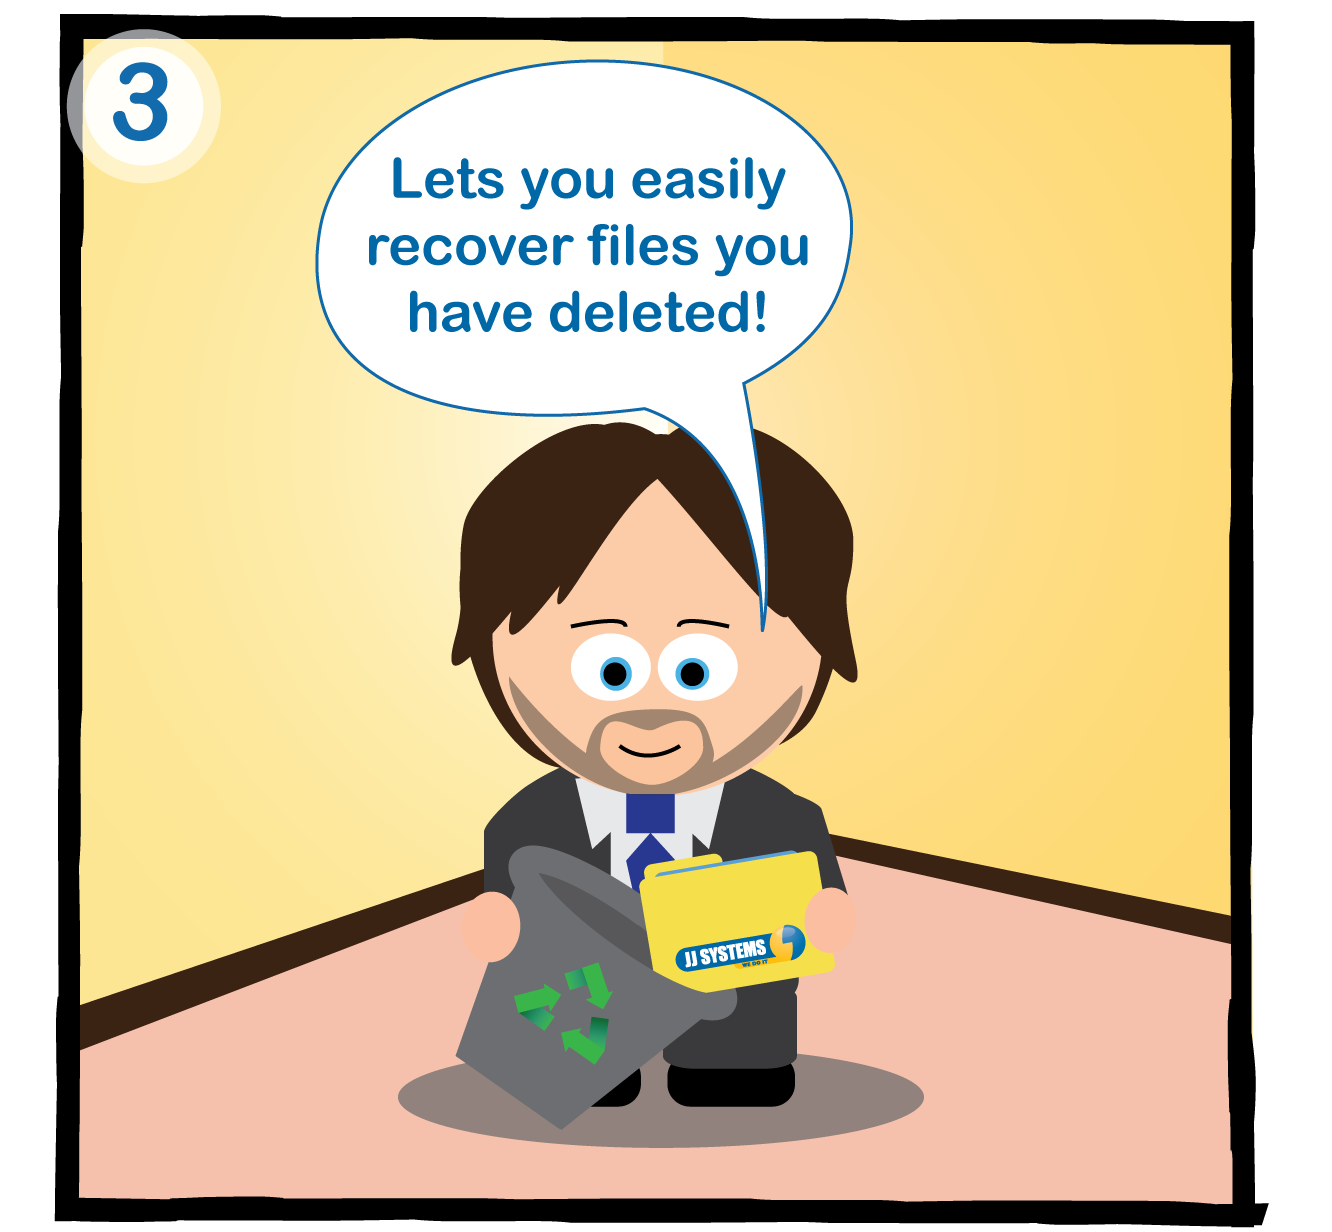 Lets you easily recover files you have deleted